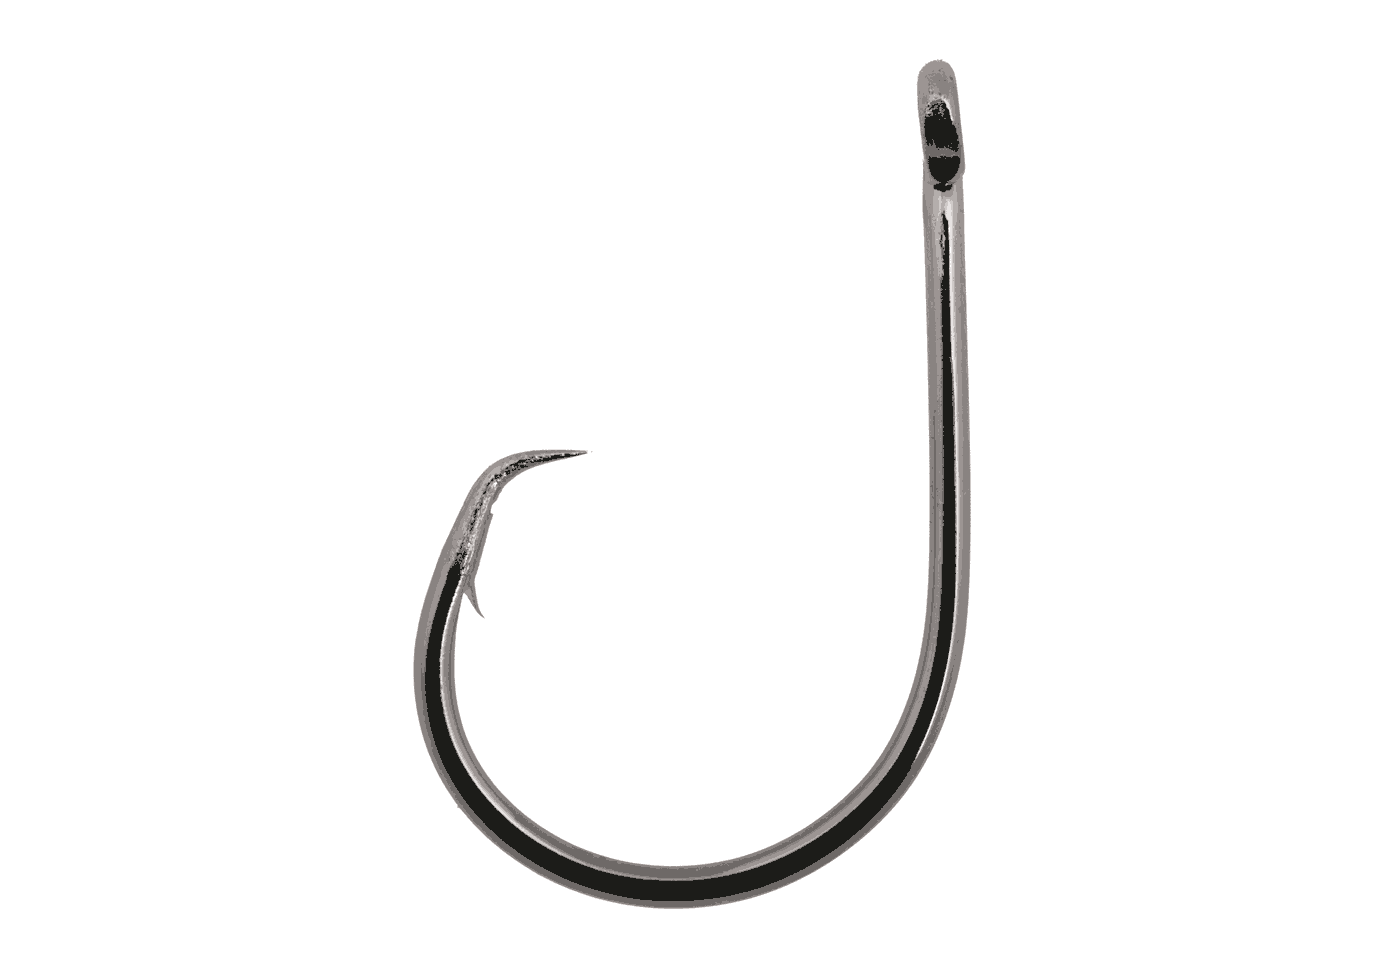 Owner 5179 SSW in-Line Straight Eye Circle Hook